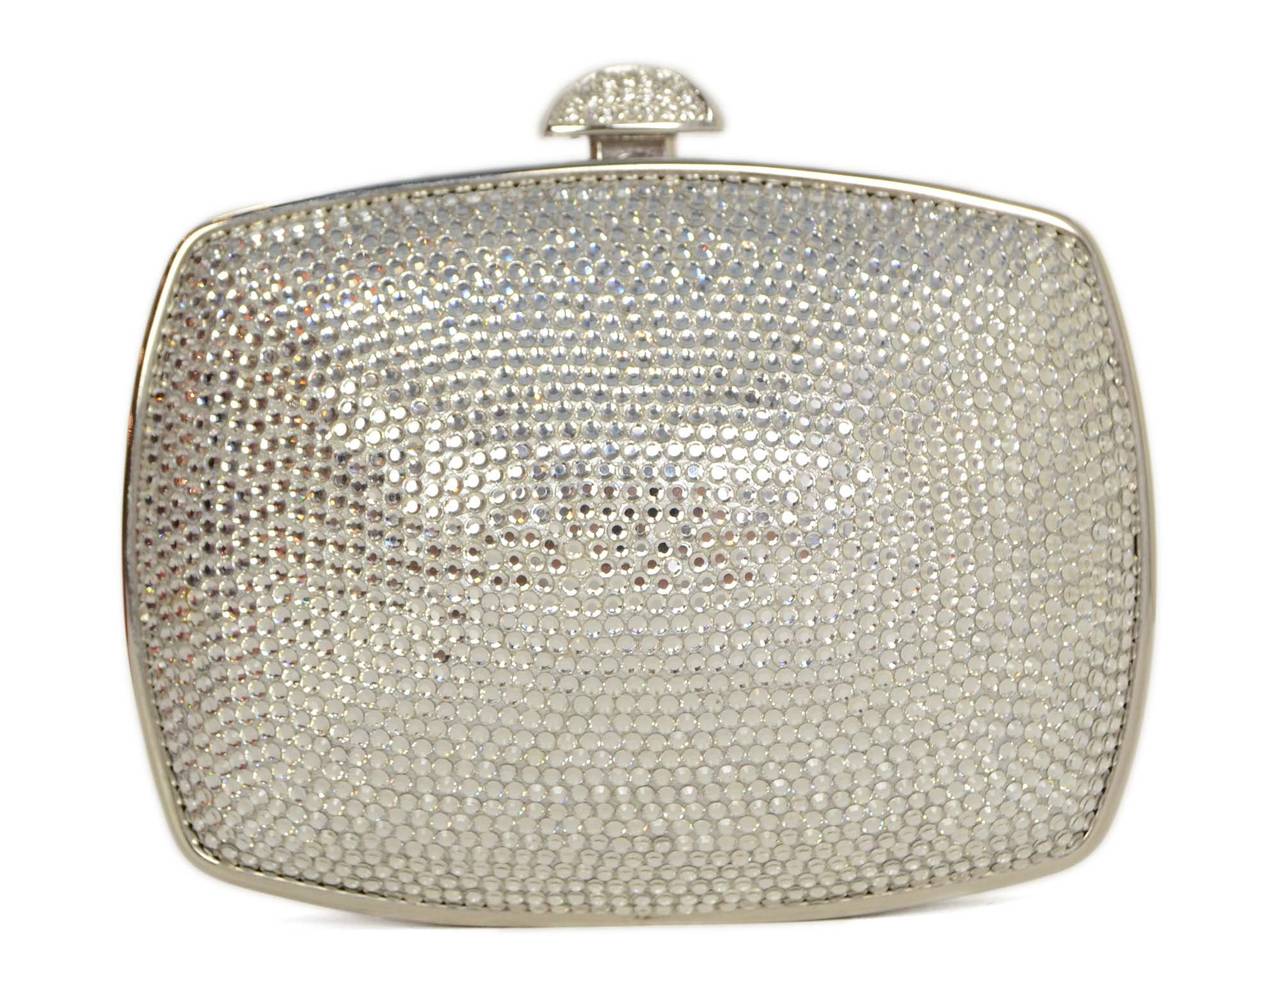 JUDITH LEIBER Silver & Crystal Minaudiere Small Clutch Bag SHW In Excellent Condition In New York, NY